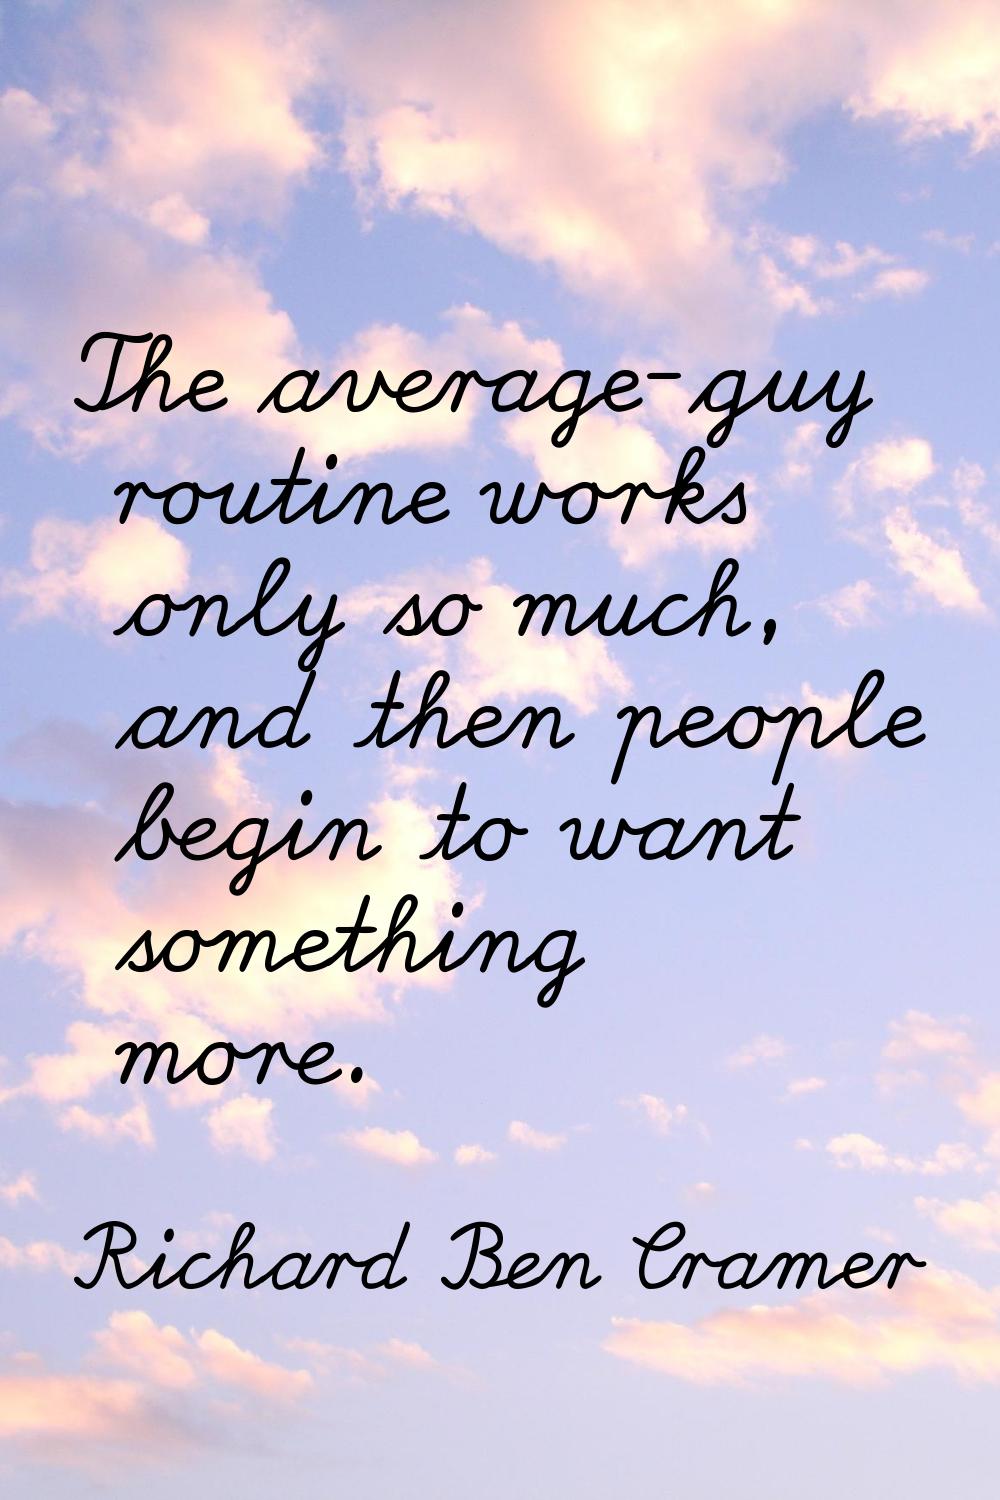 The average-guy routine works only so much, and then people begin to want something more.